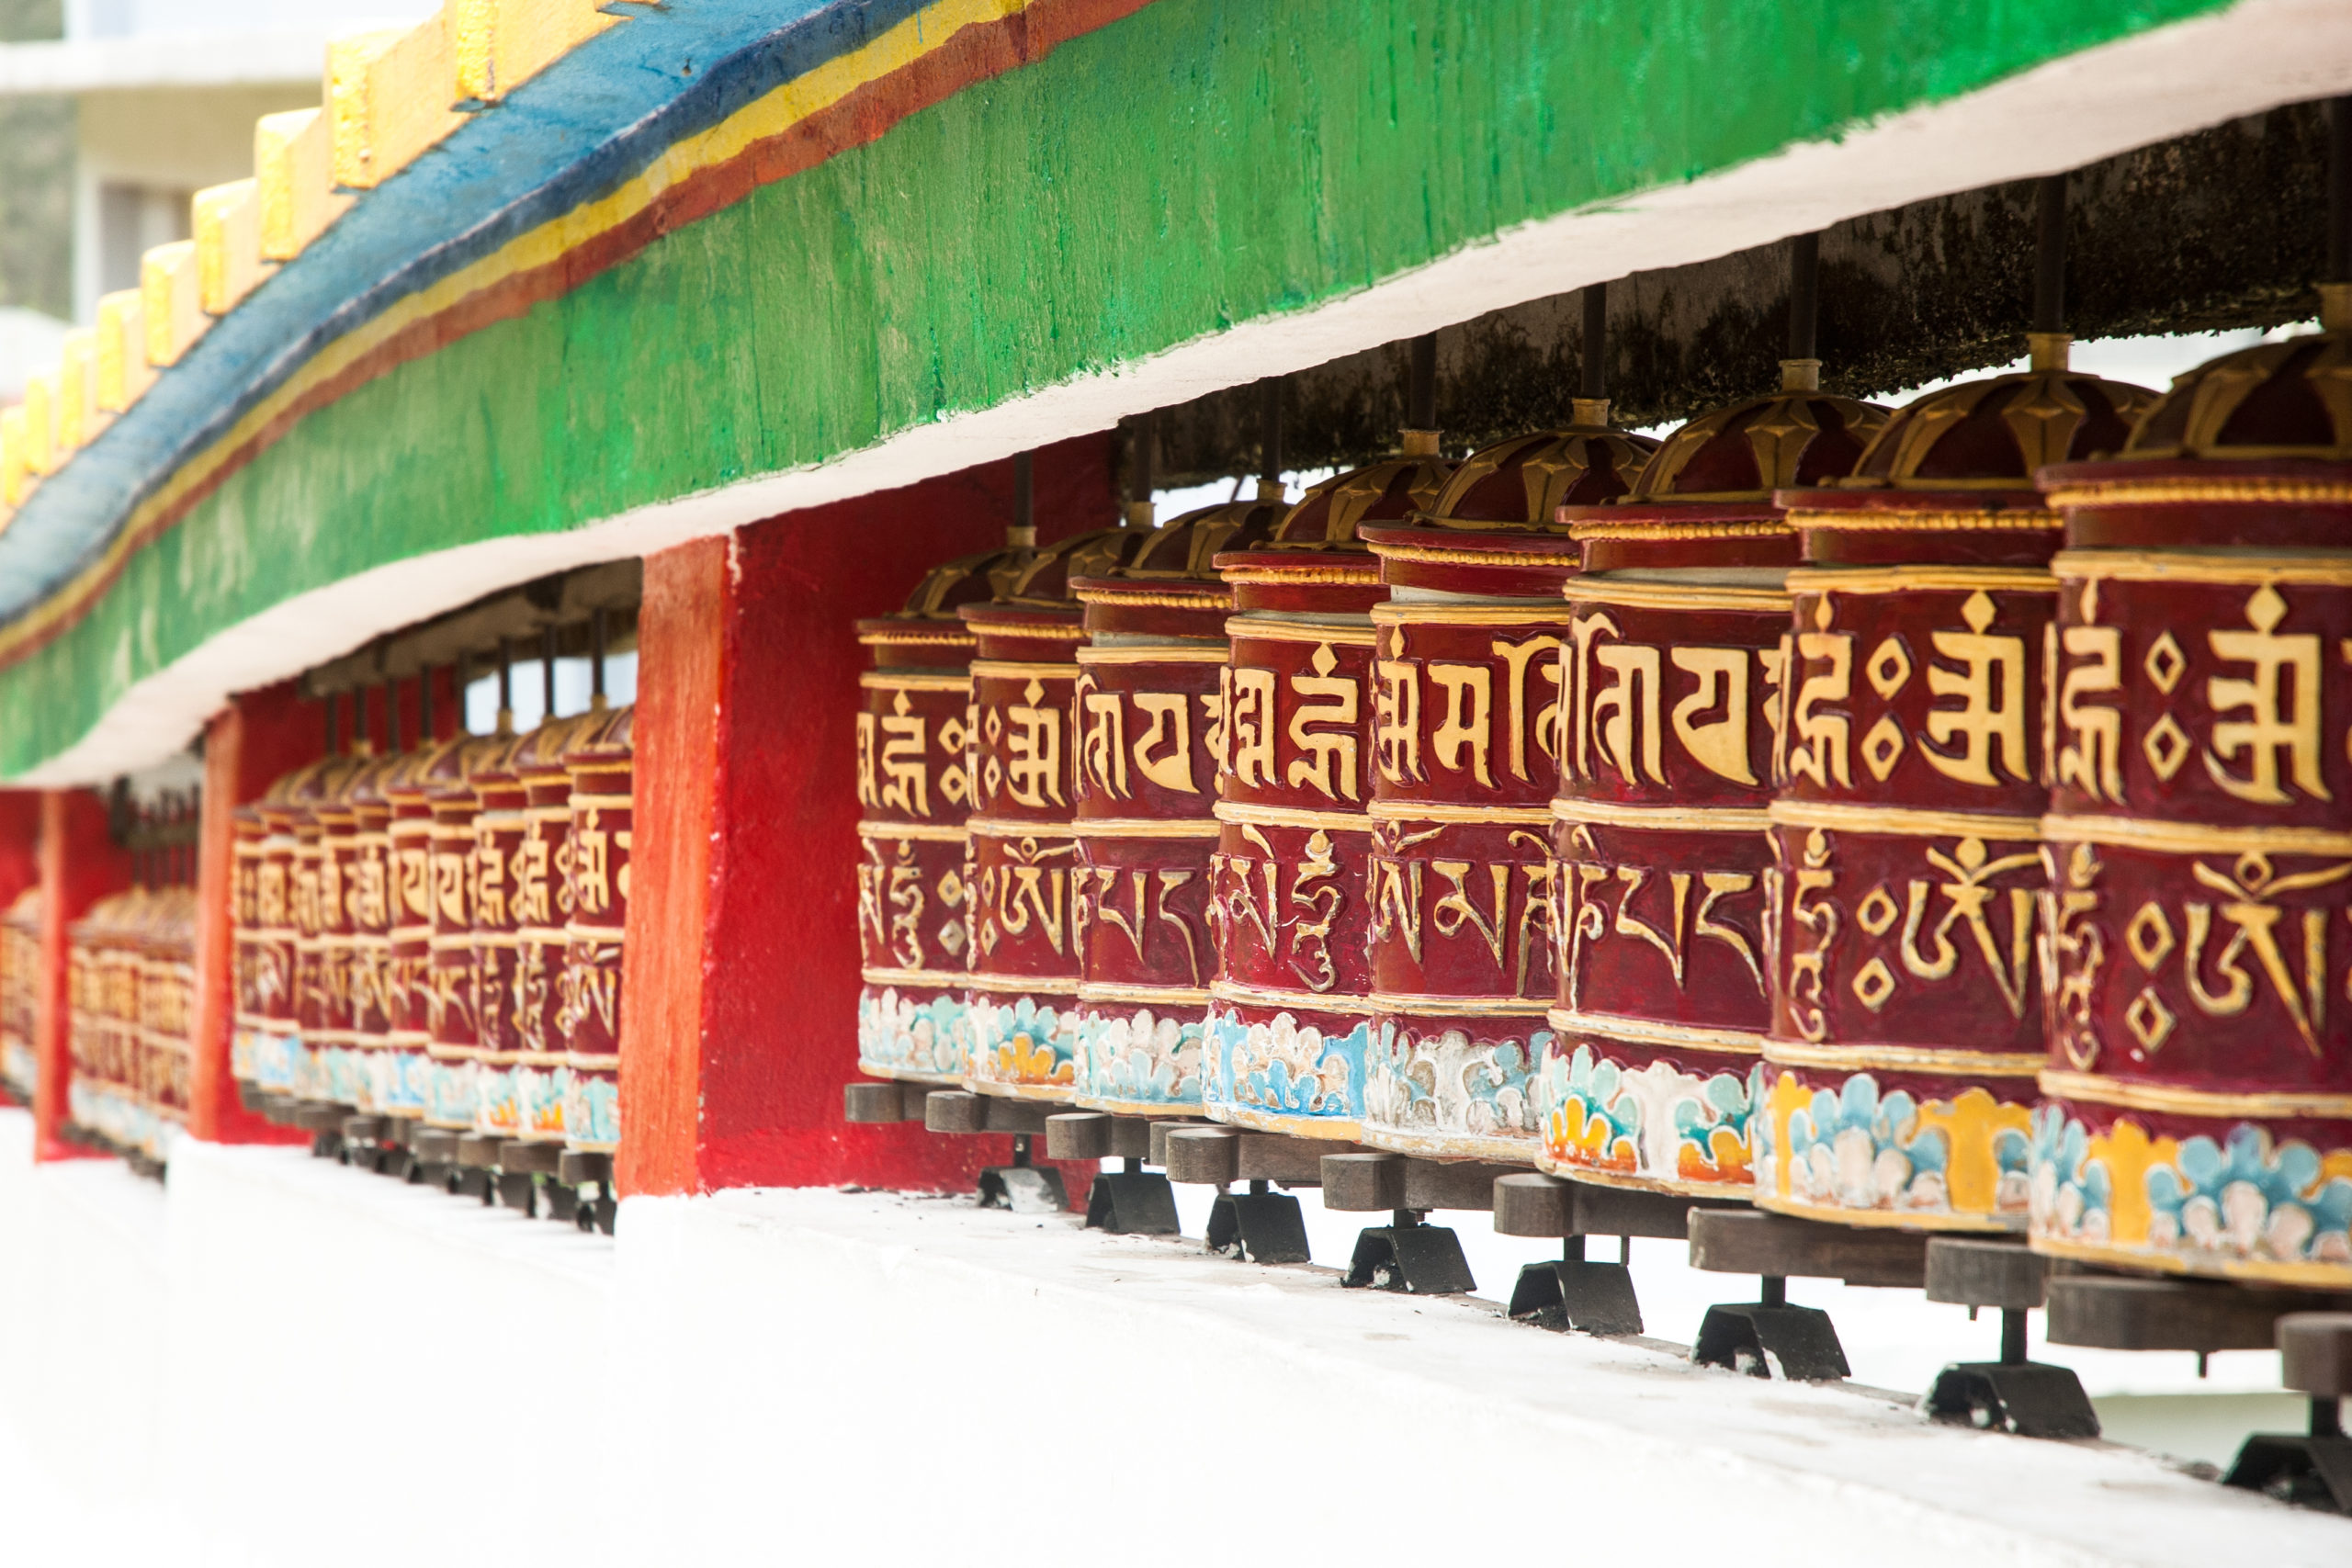 Experience extraordinary Indian sights like this long row of prayer wheels in Gangtok when you take a tailor-made holiday with Alfred&.